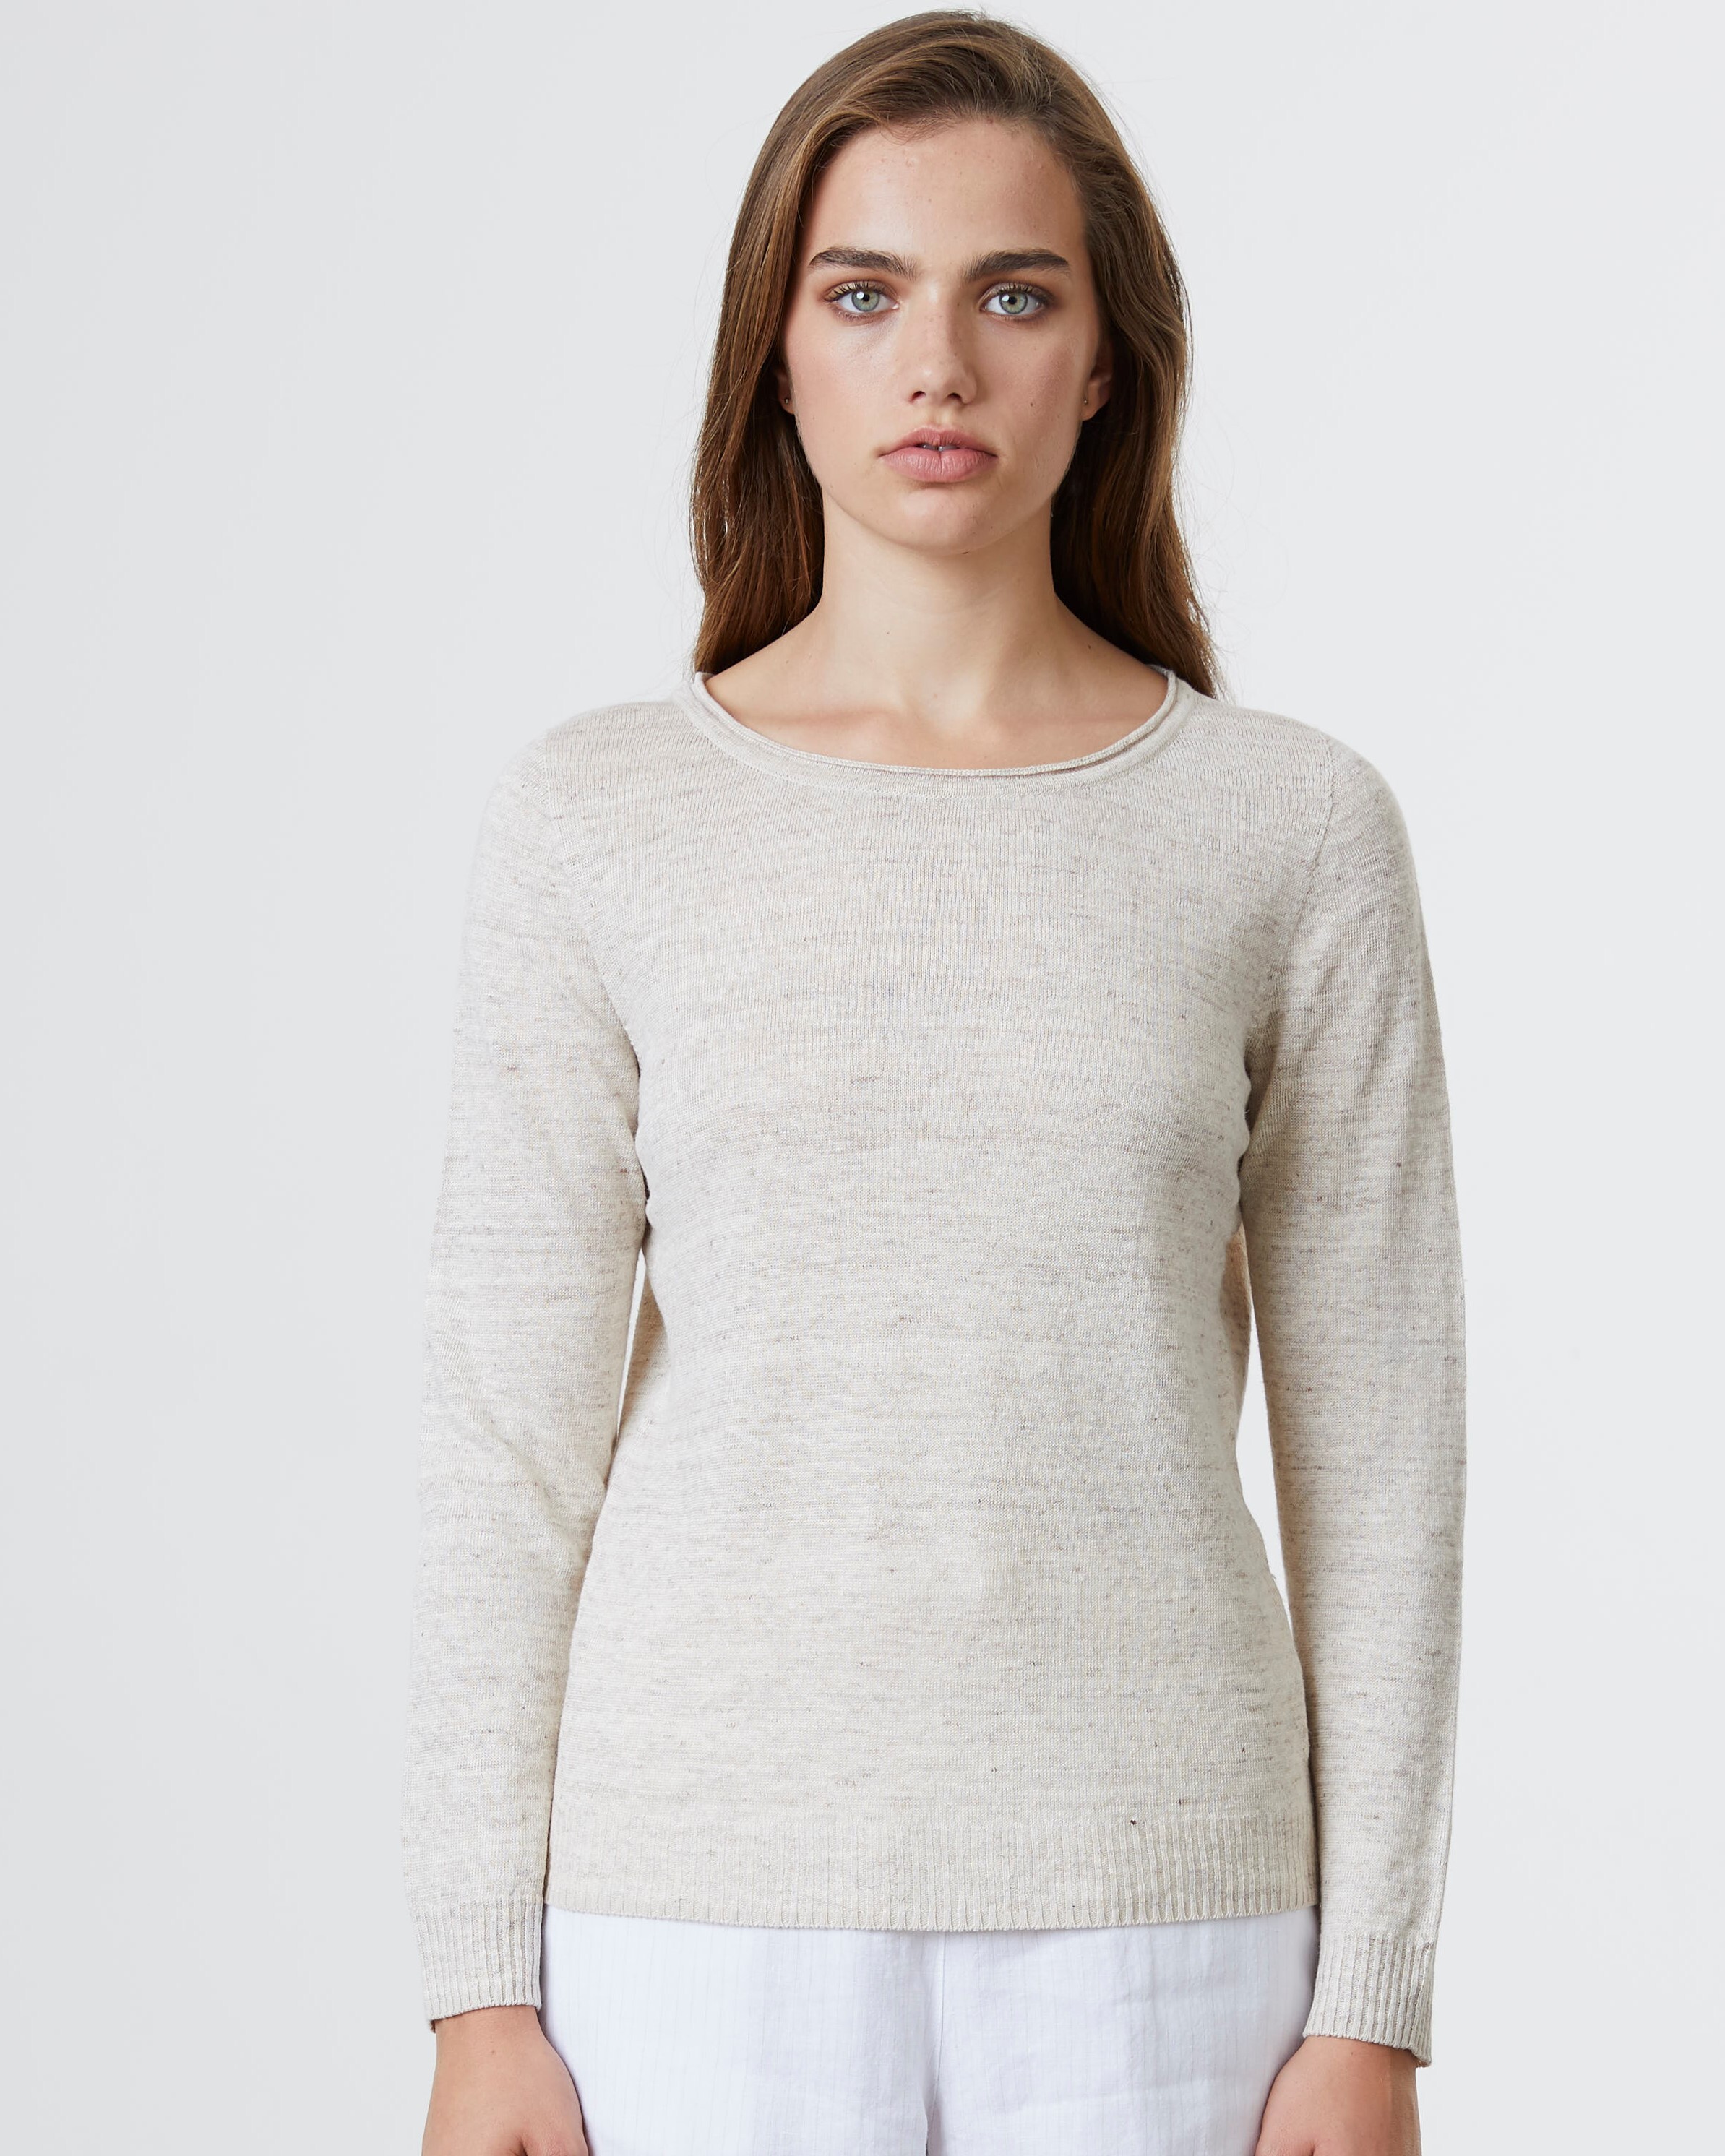 LINEN FINE JUMPER (NATURAL/SEED)- STANDARD ISSUE SPRING 21 Boxing Day Sale